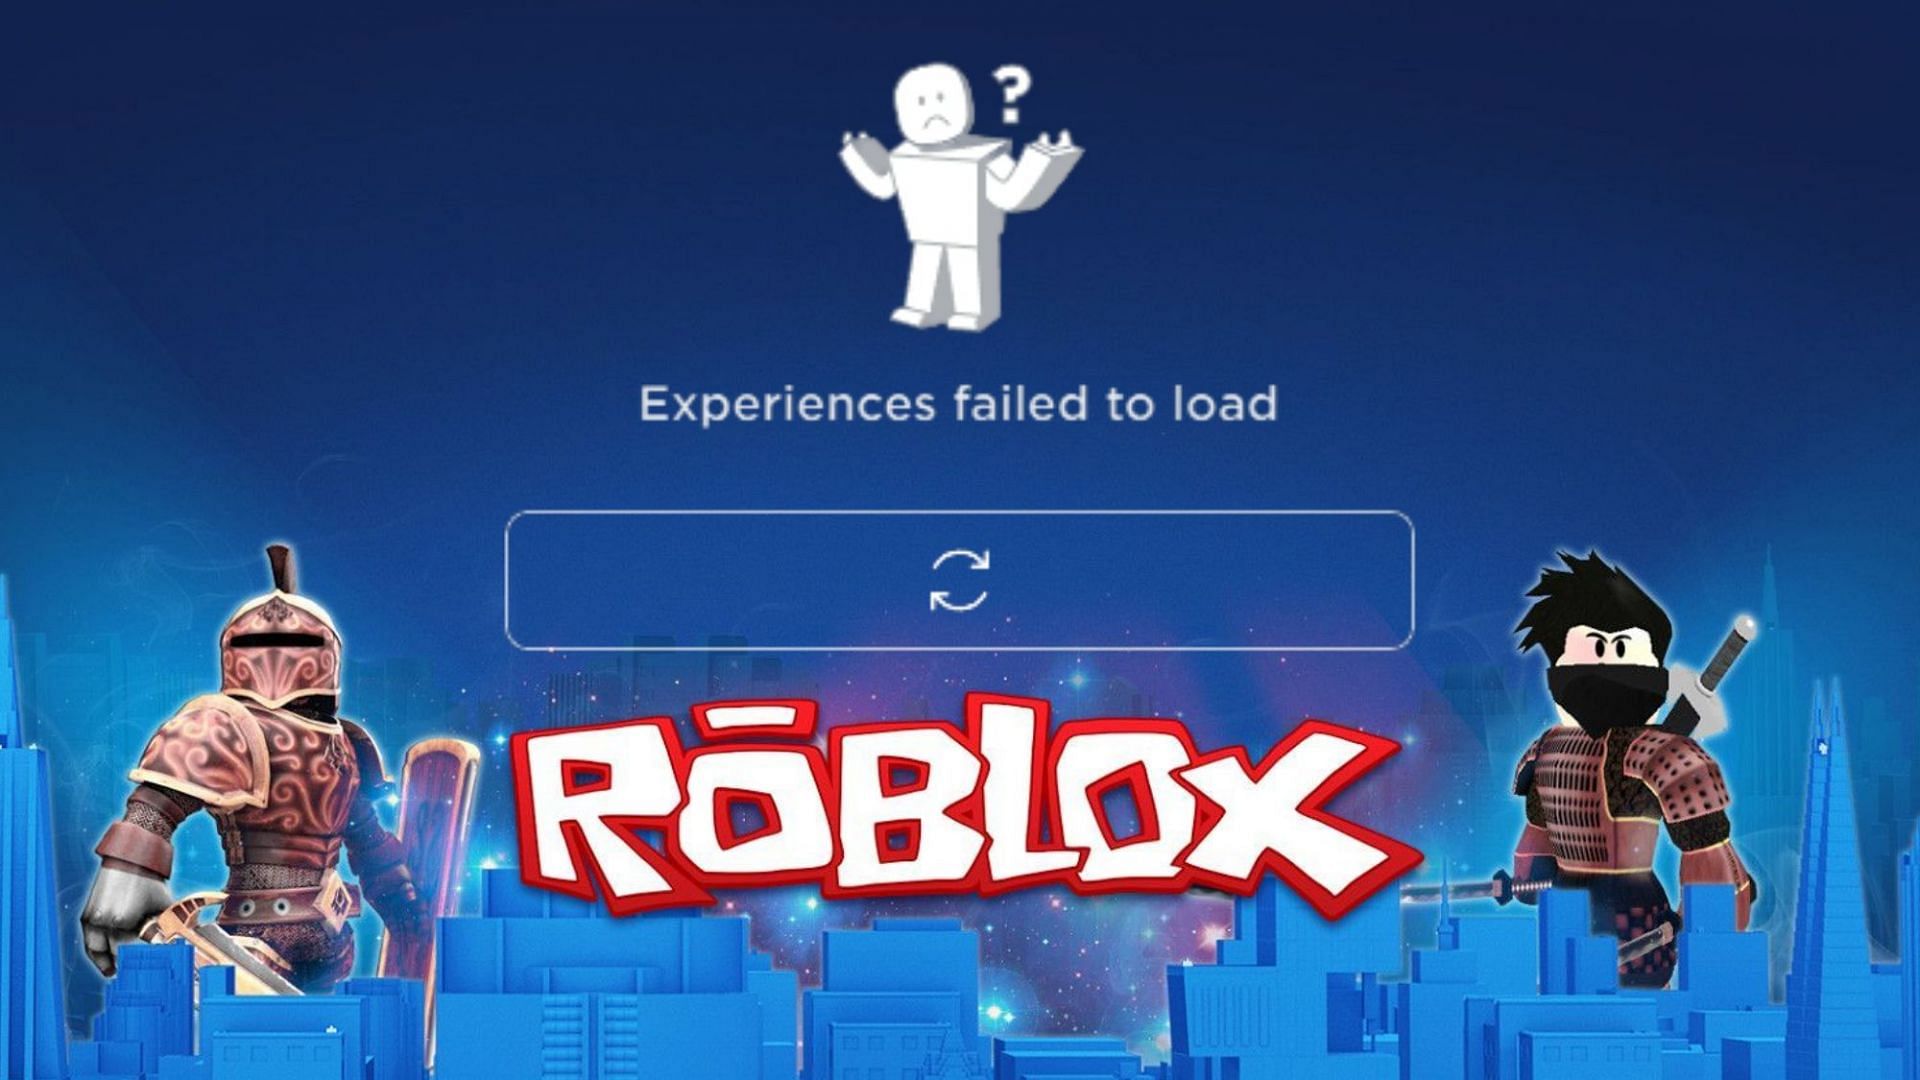 Why is Roblox not working? Reasons and solutions